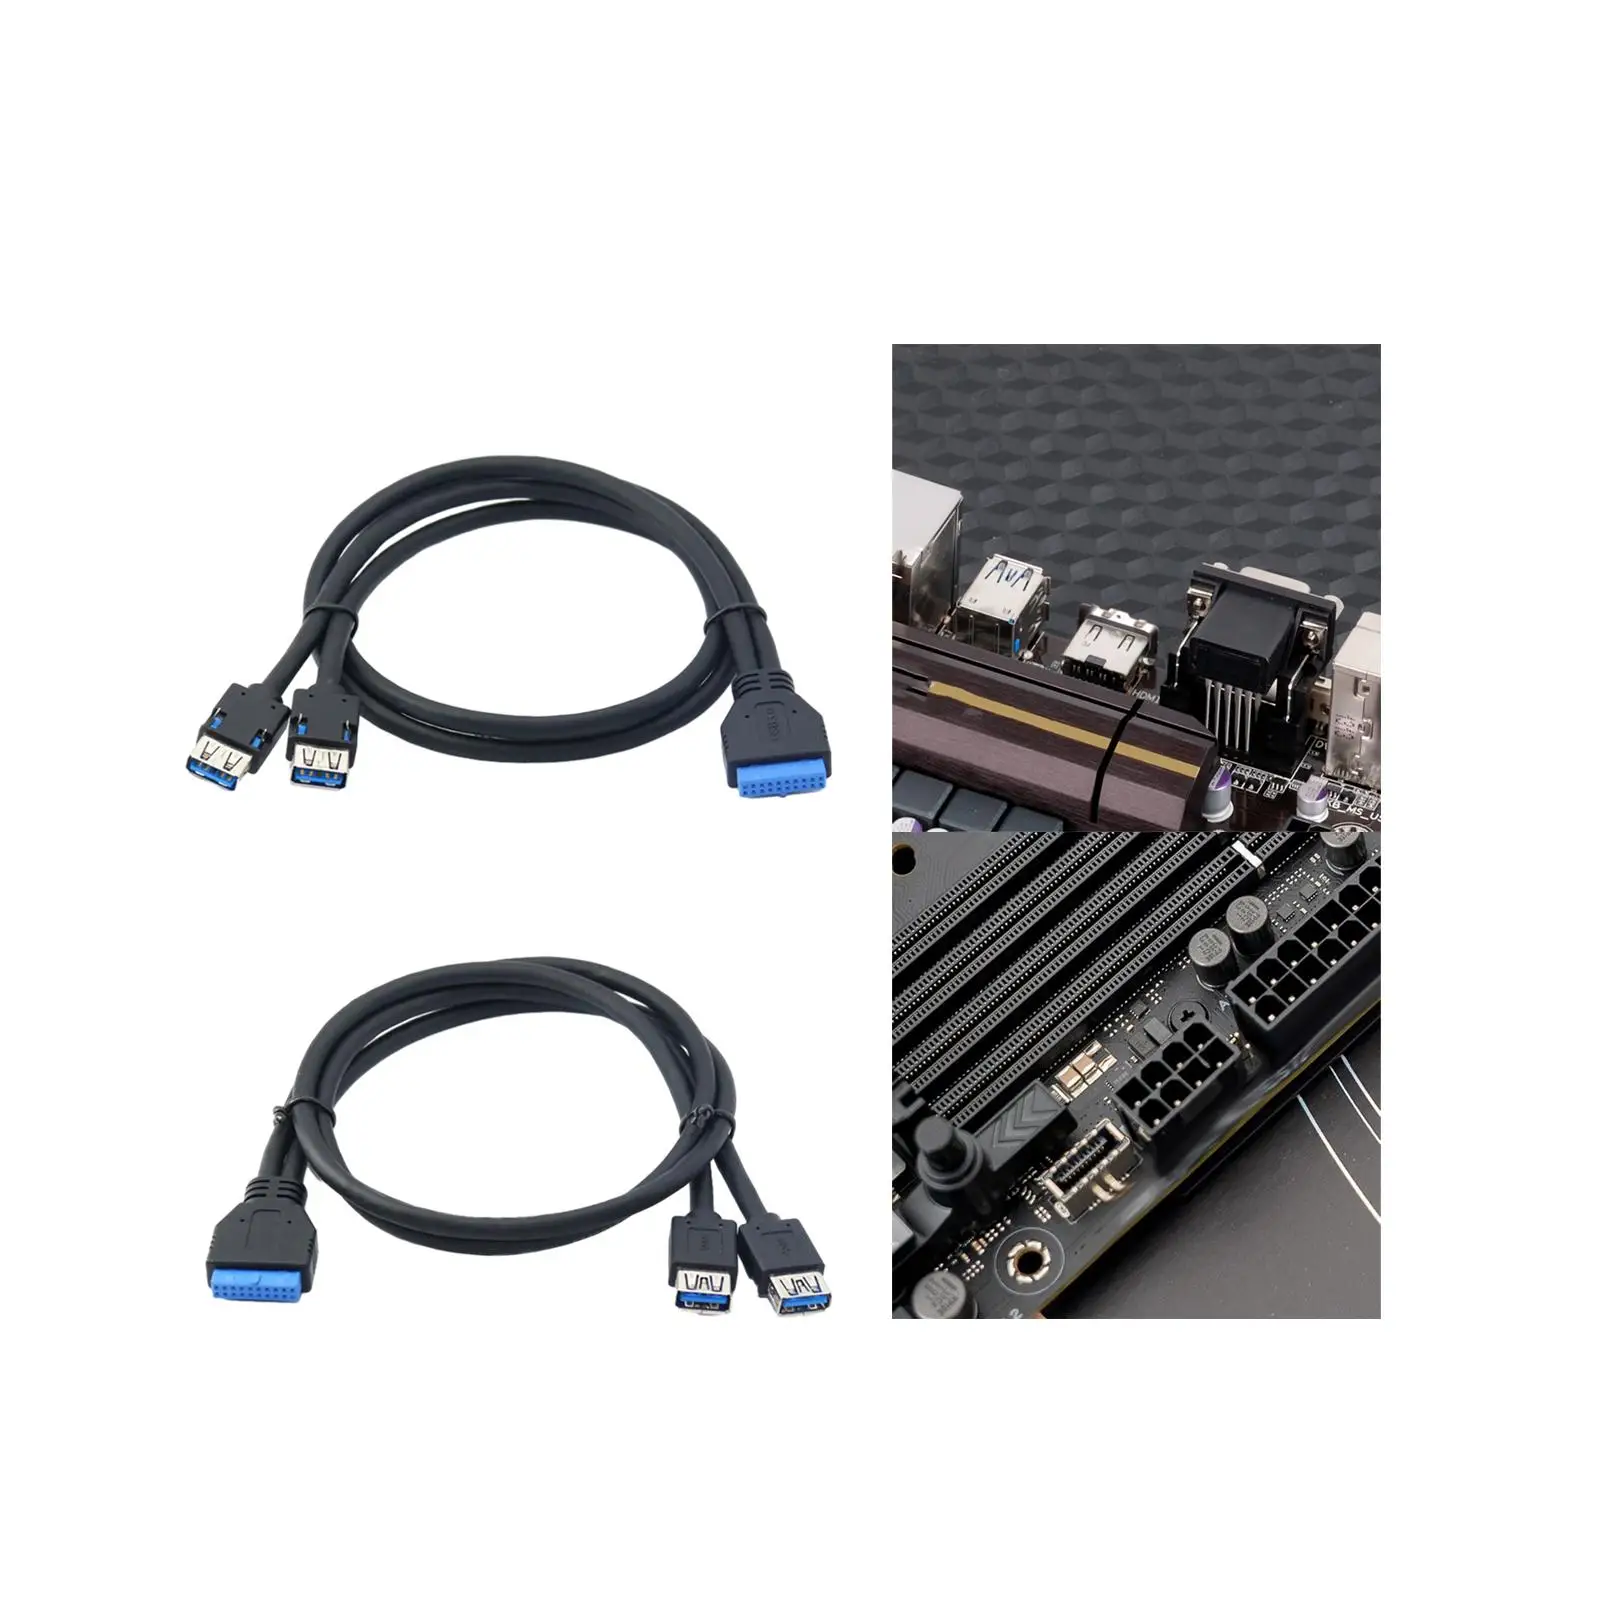 20 Pin USB 3.0 to 2 Ports Cable Internal Simple Computer Networking Switches